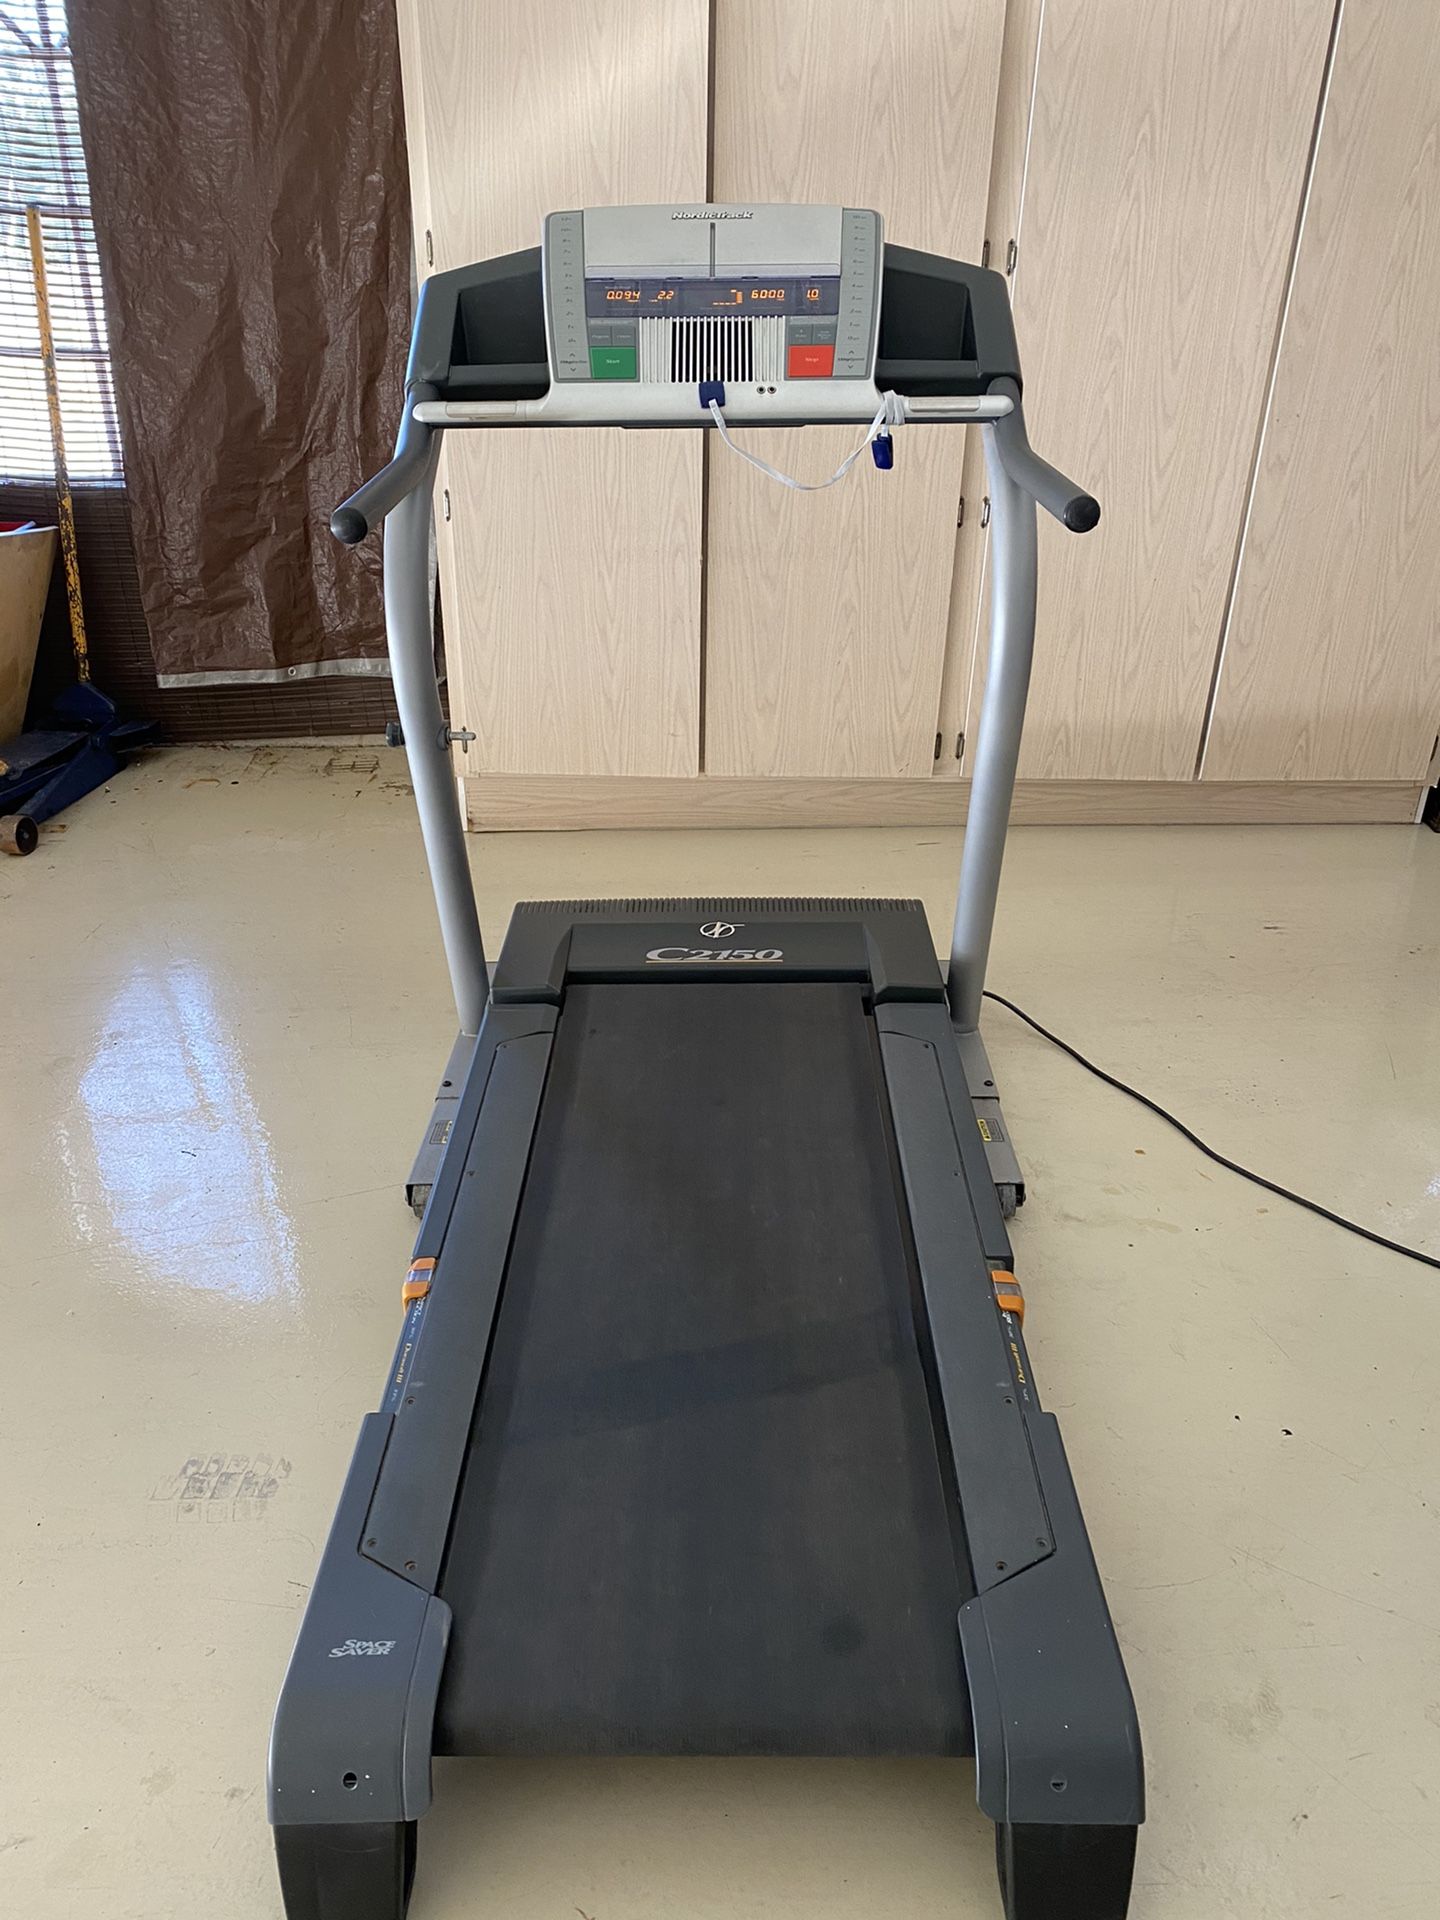 NordicTrack C2150 Exercise Treadmill